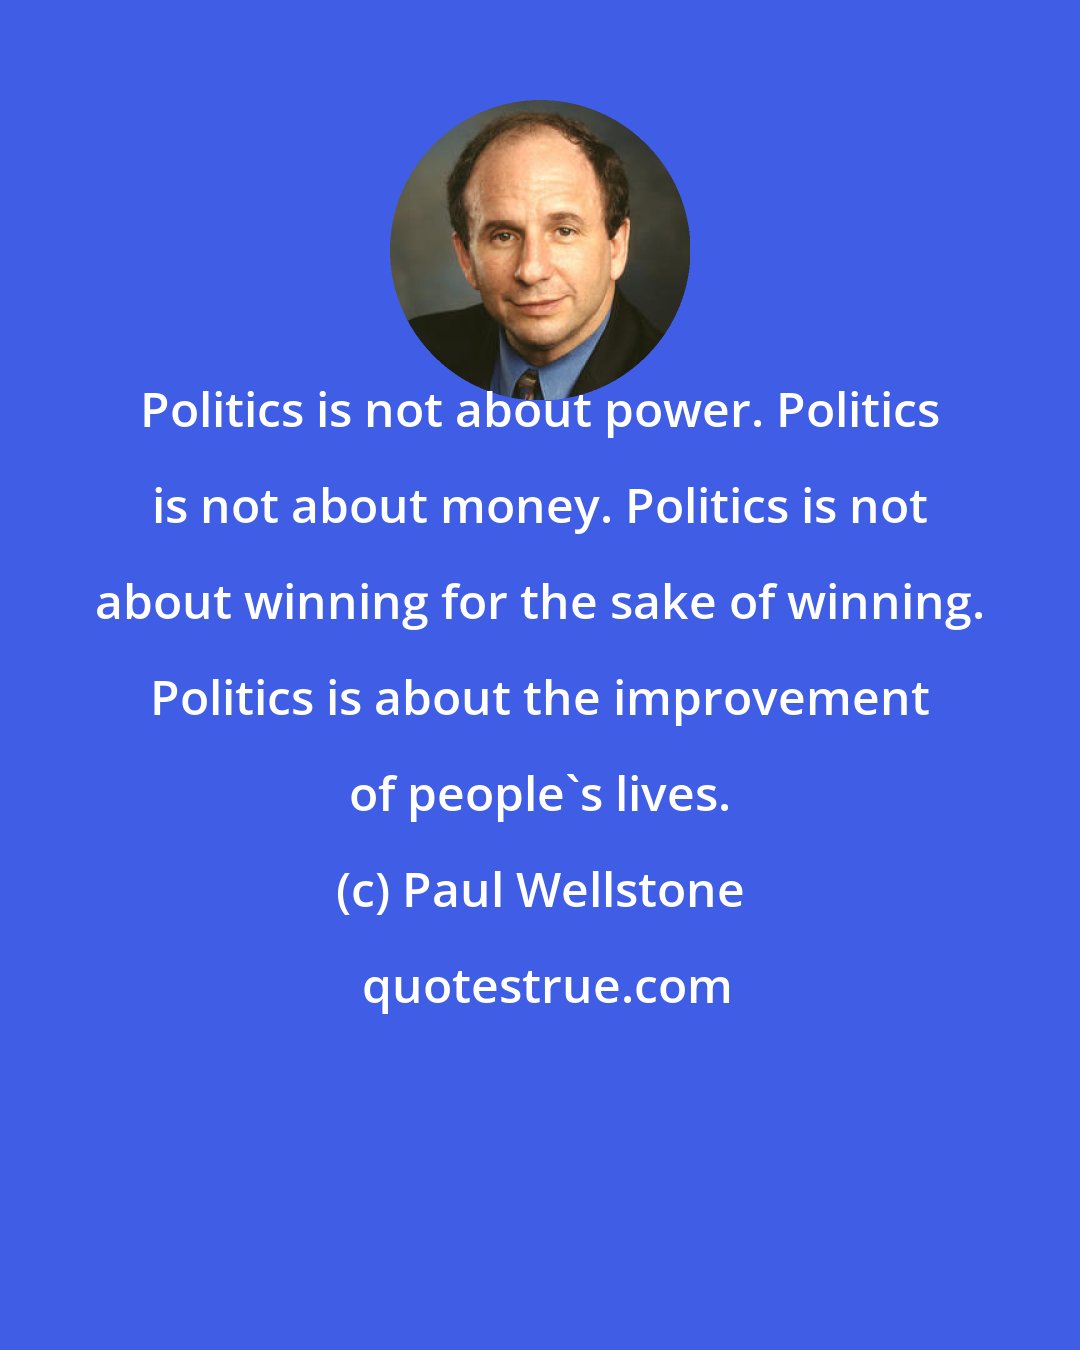 Paul Wellstone: Politics is not about power. Politics is not about money. Politics is not about winning for the sake of winning. Politics is about the improvement of people's lives.